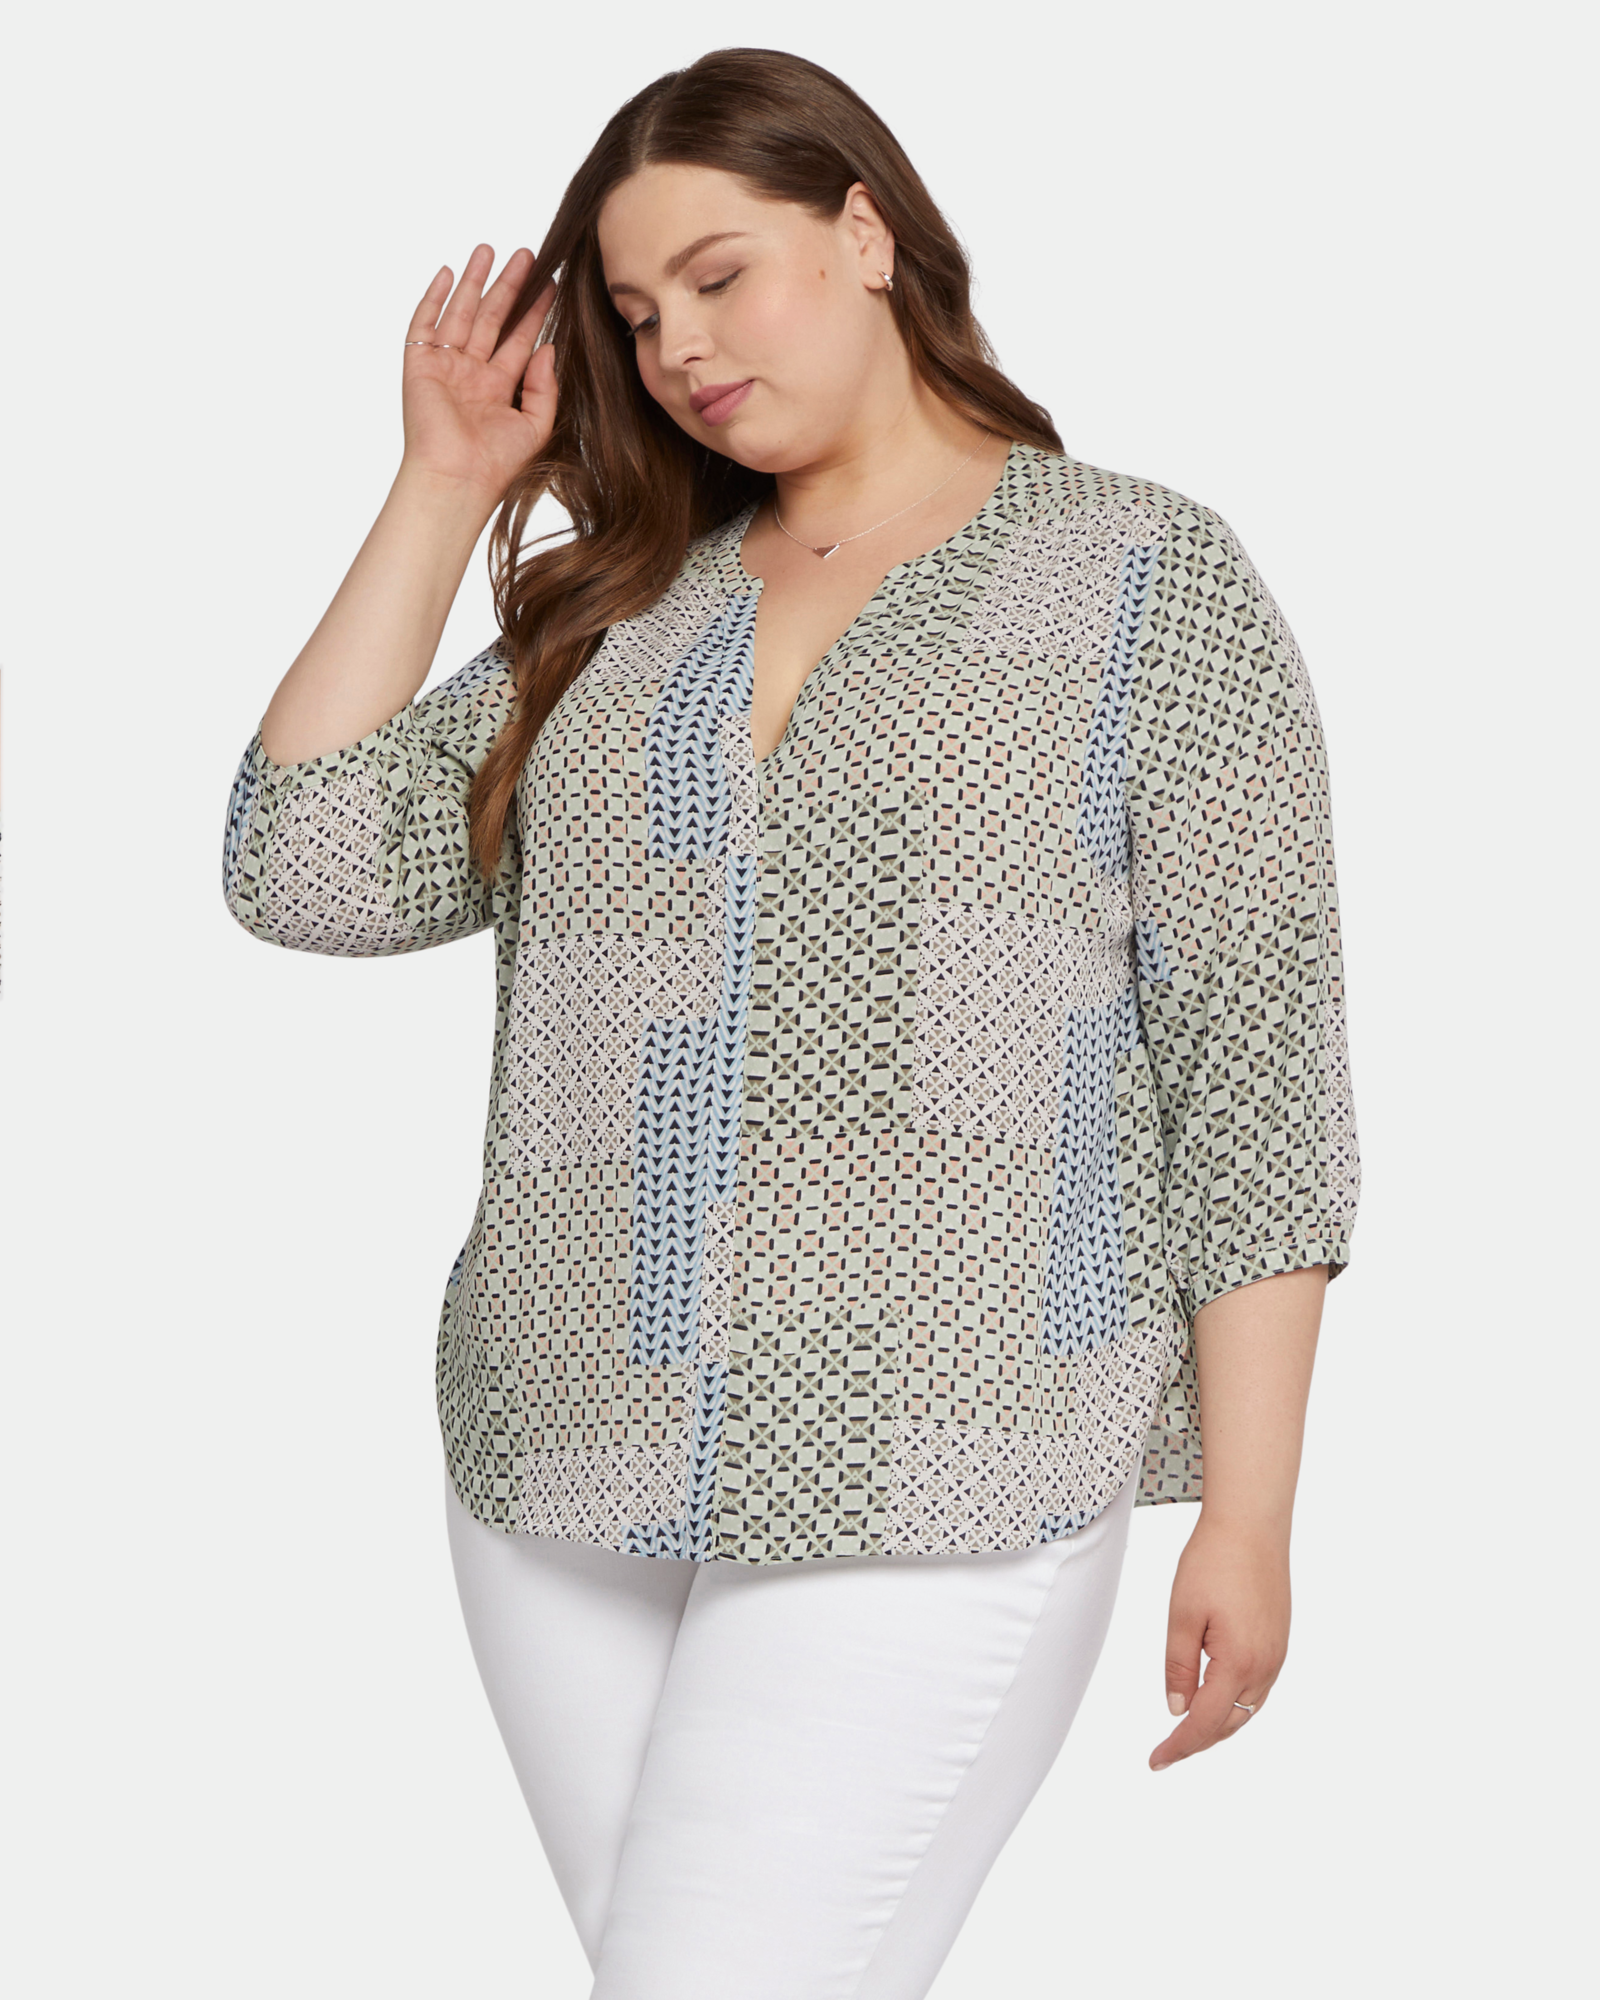 Plus Size Printed Tops